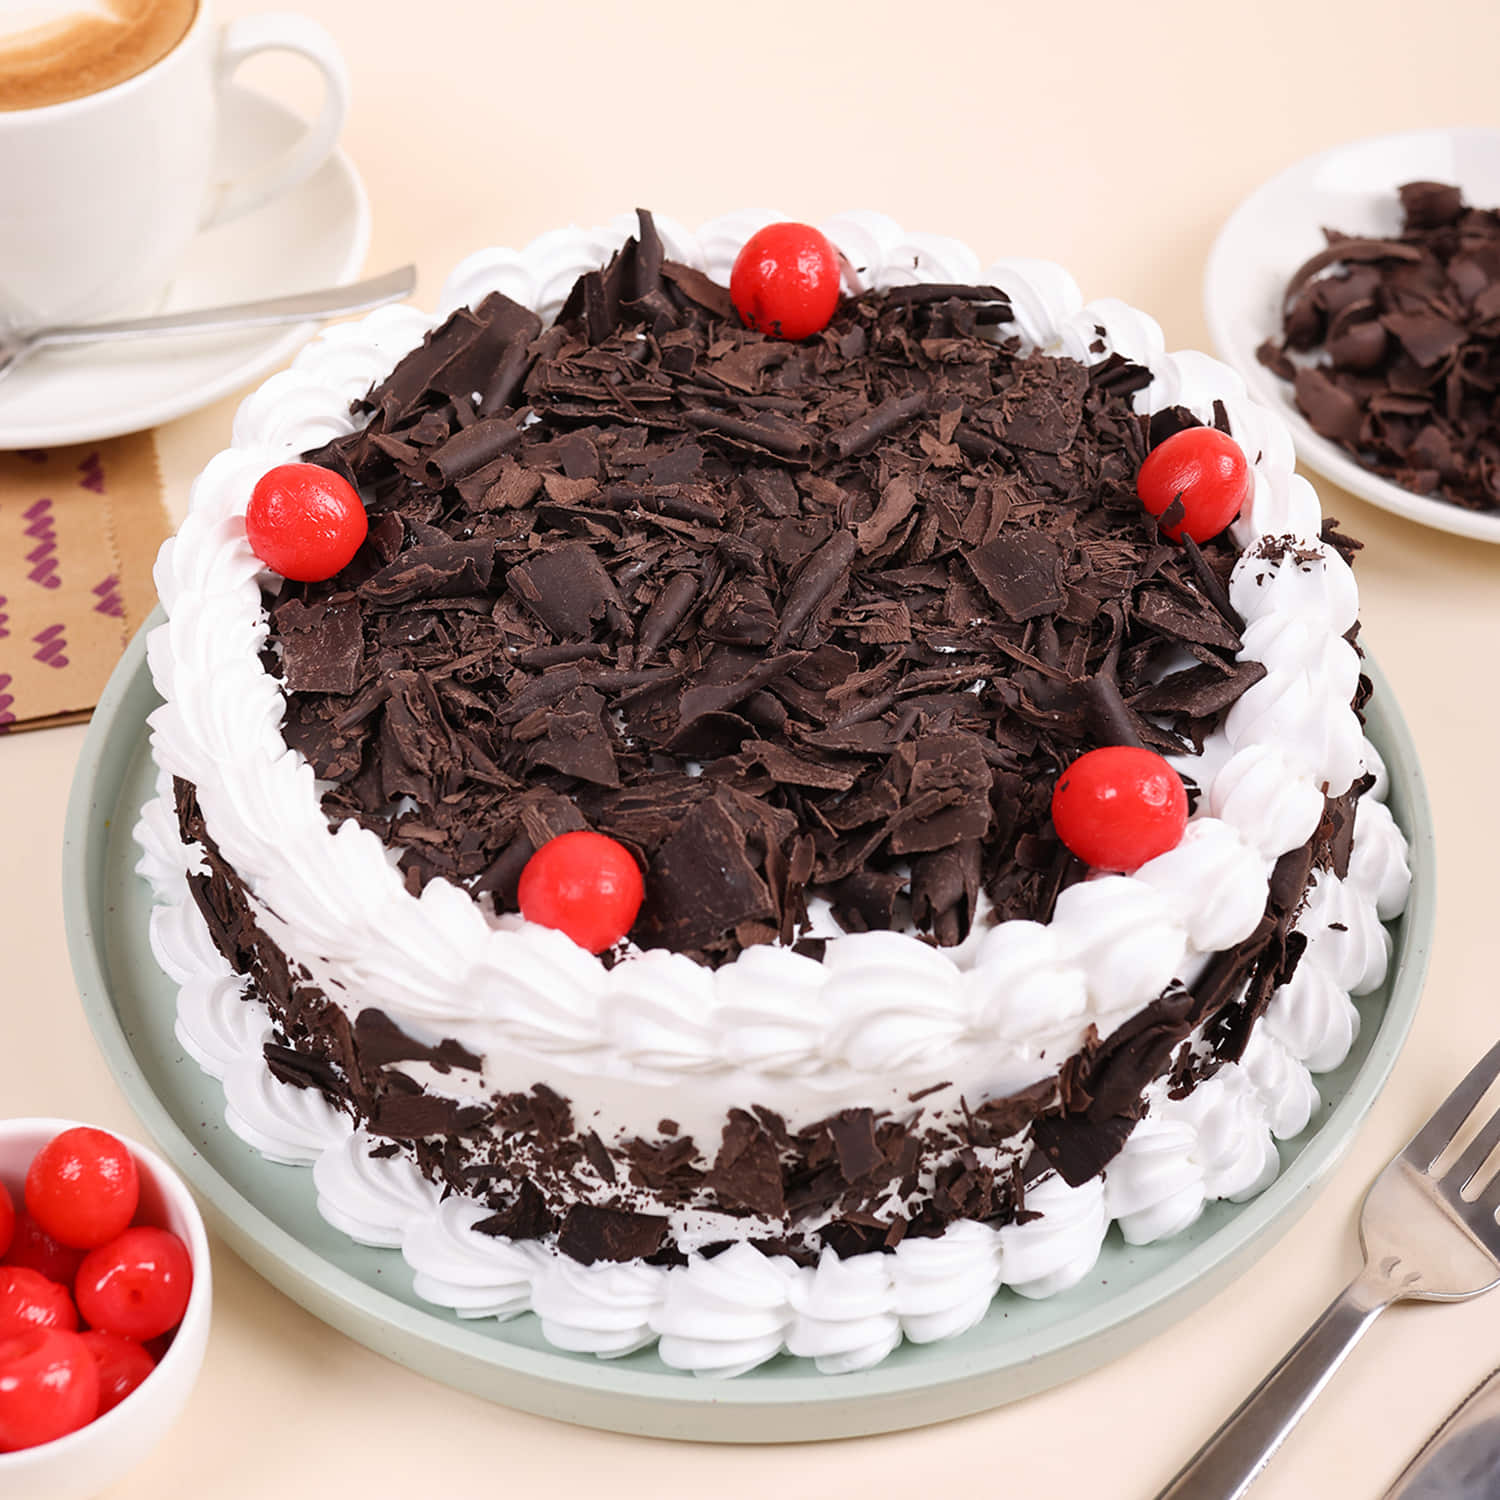 Send Same Day Cake Delivery Cakes to Sector 5 Noida @499